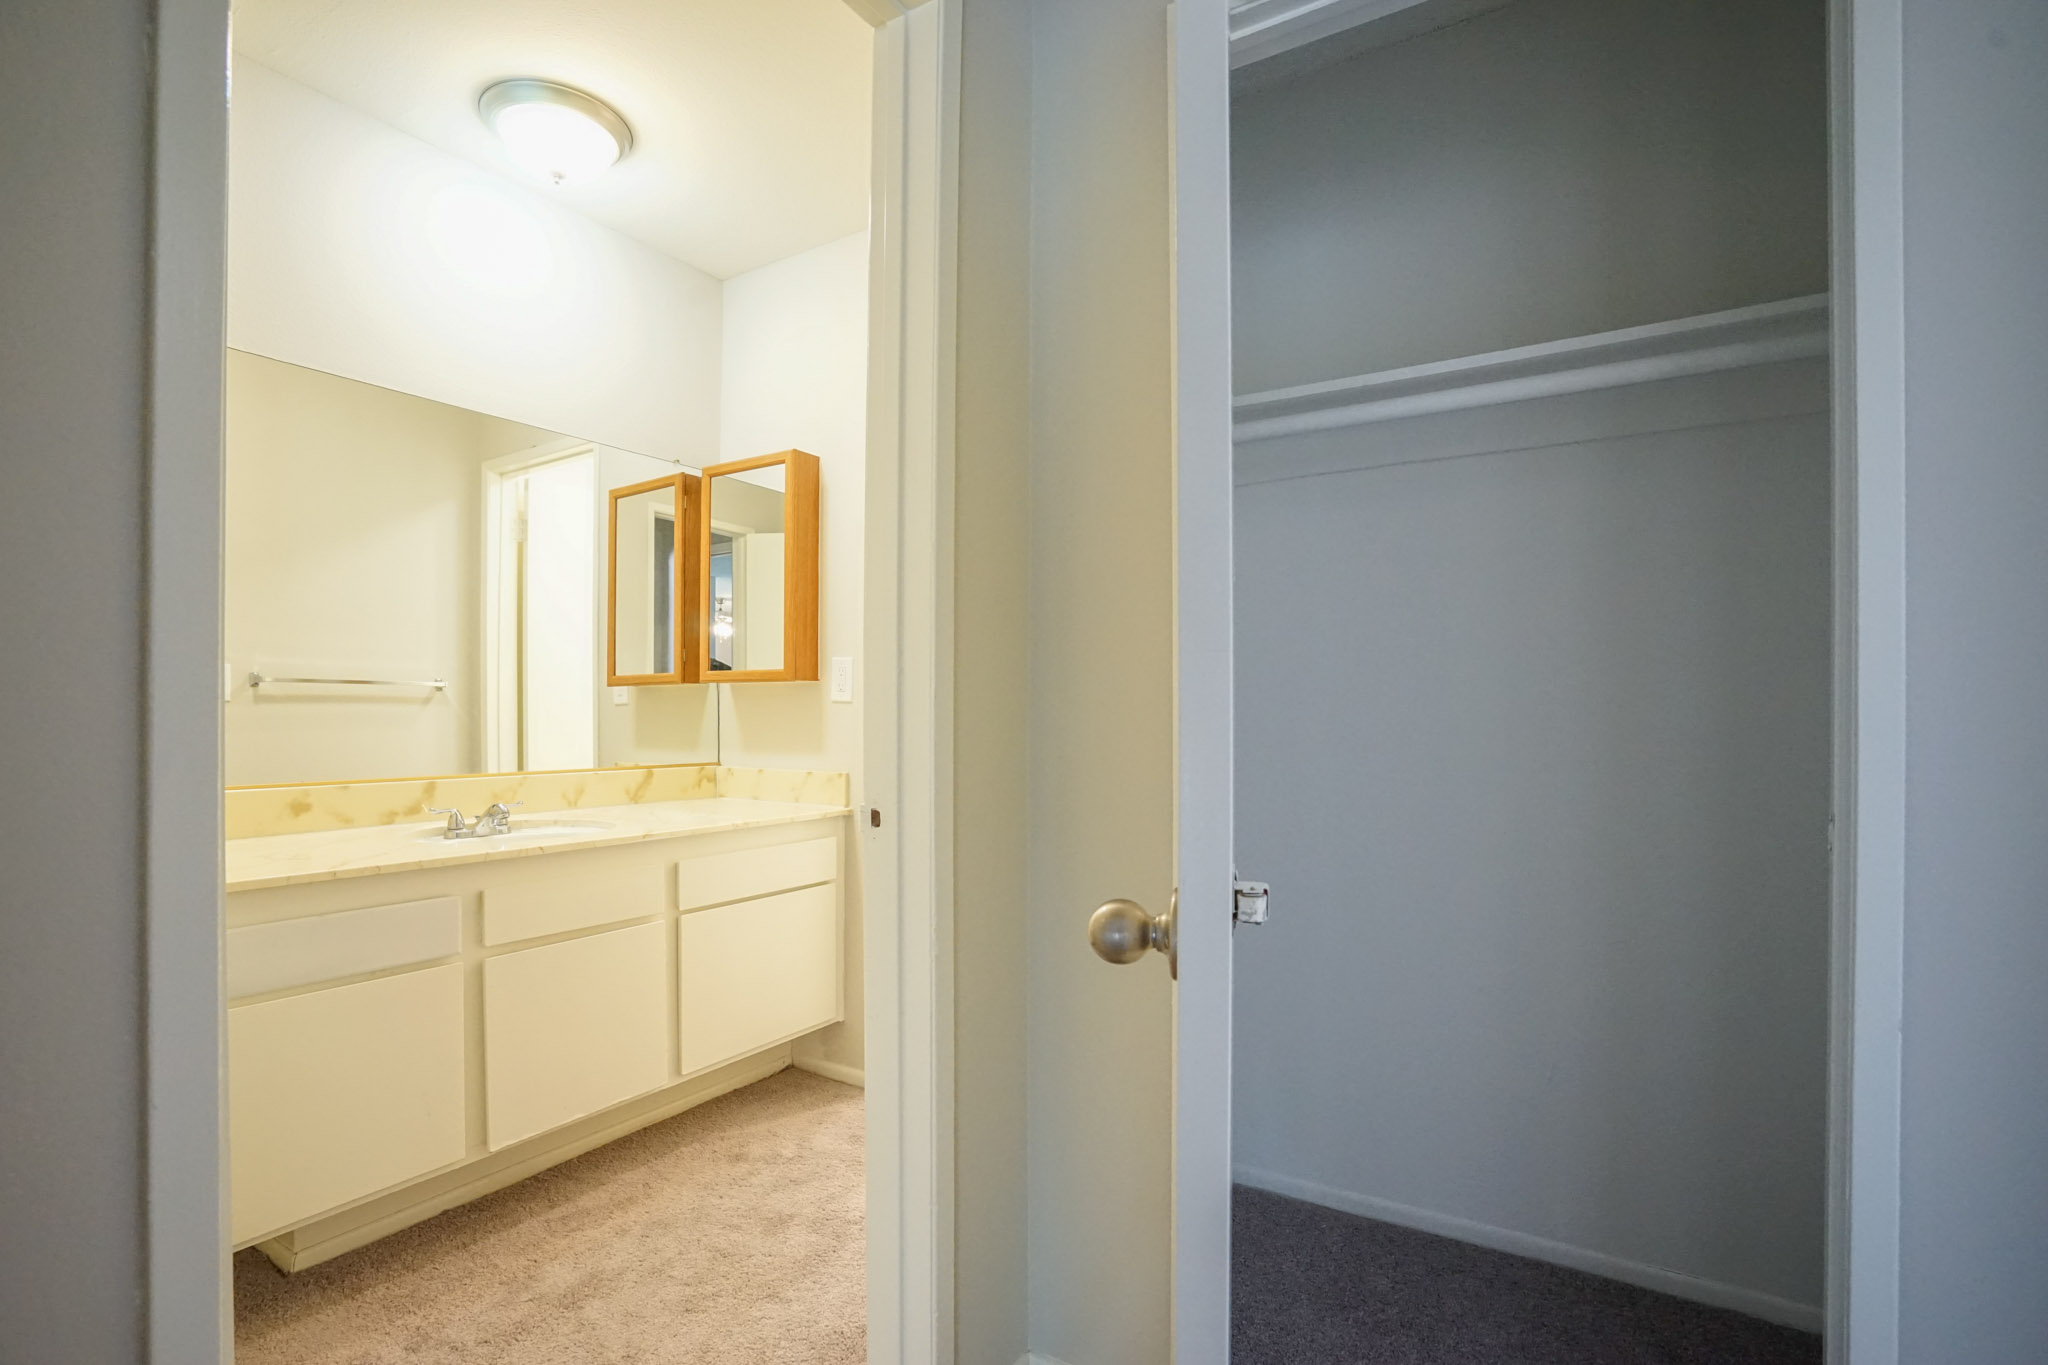 View of a section of a bathrooom in which a sink, a mirror, and a medicine cabinet is visble. Next to the entry of the bathroom is a closet.